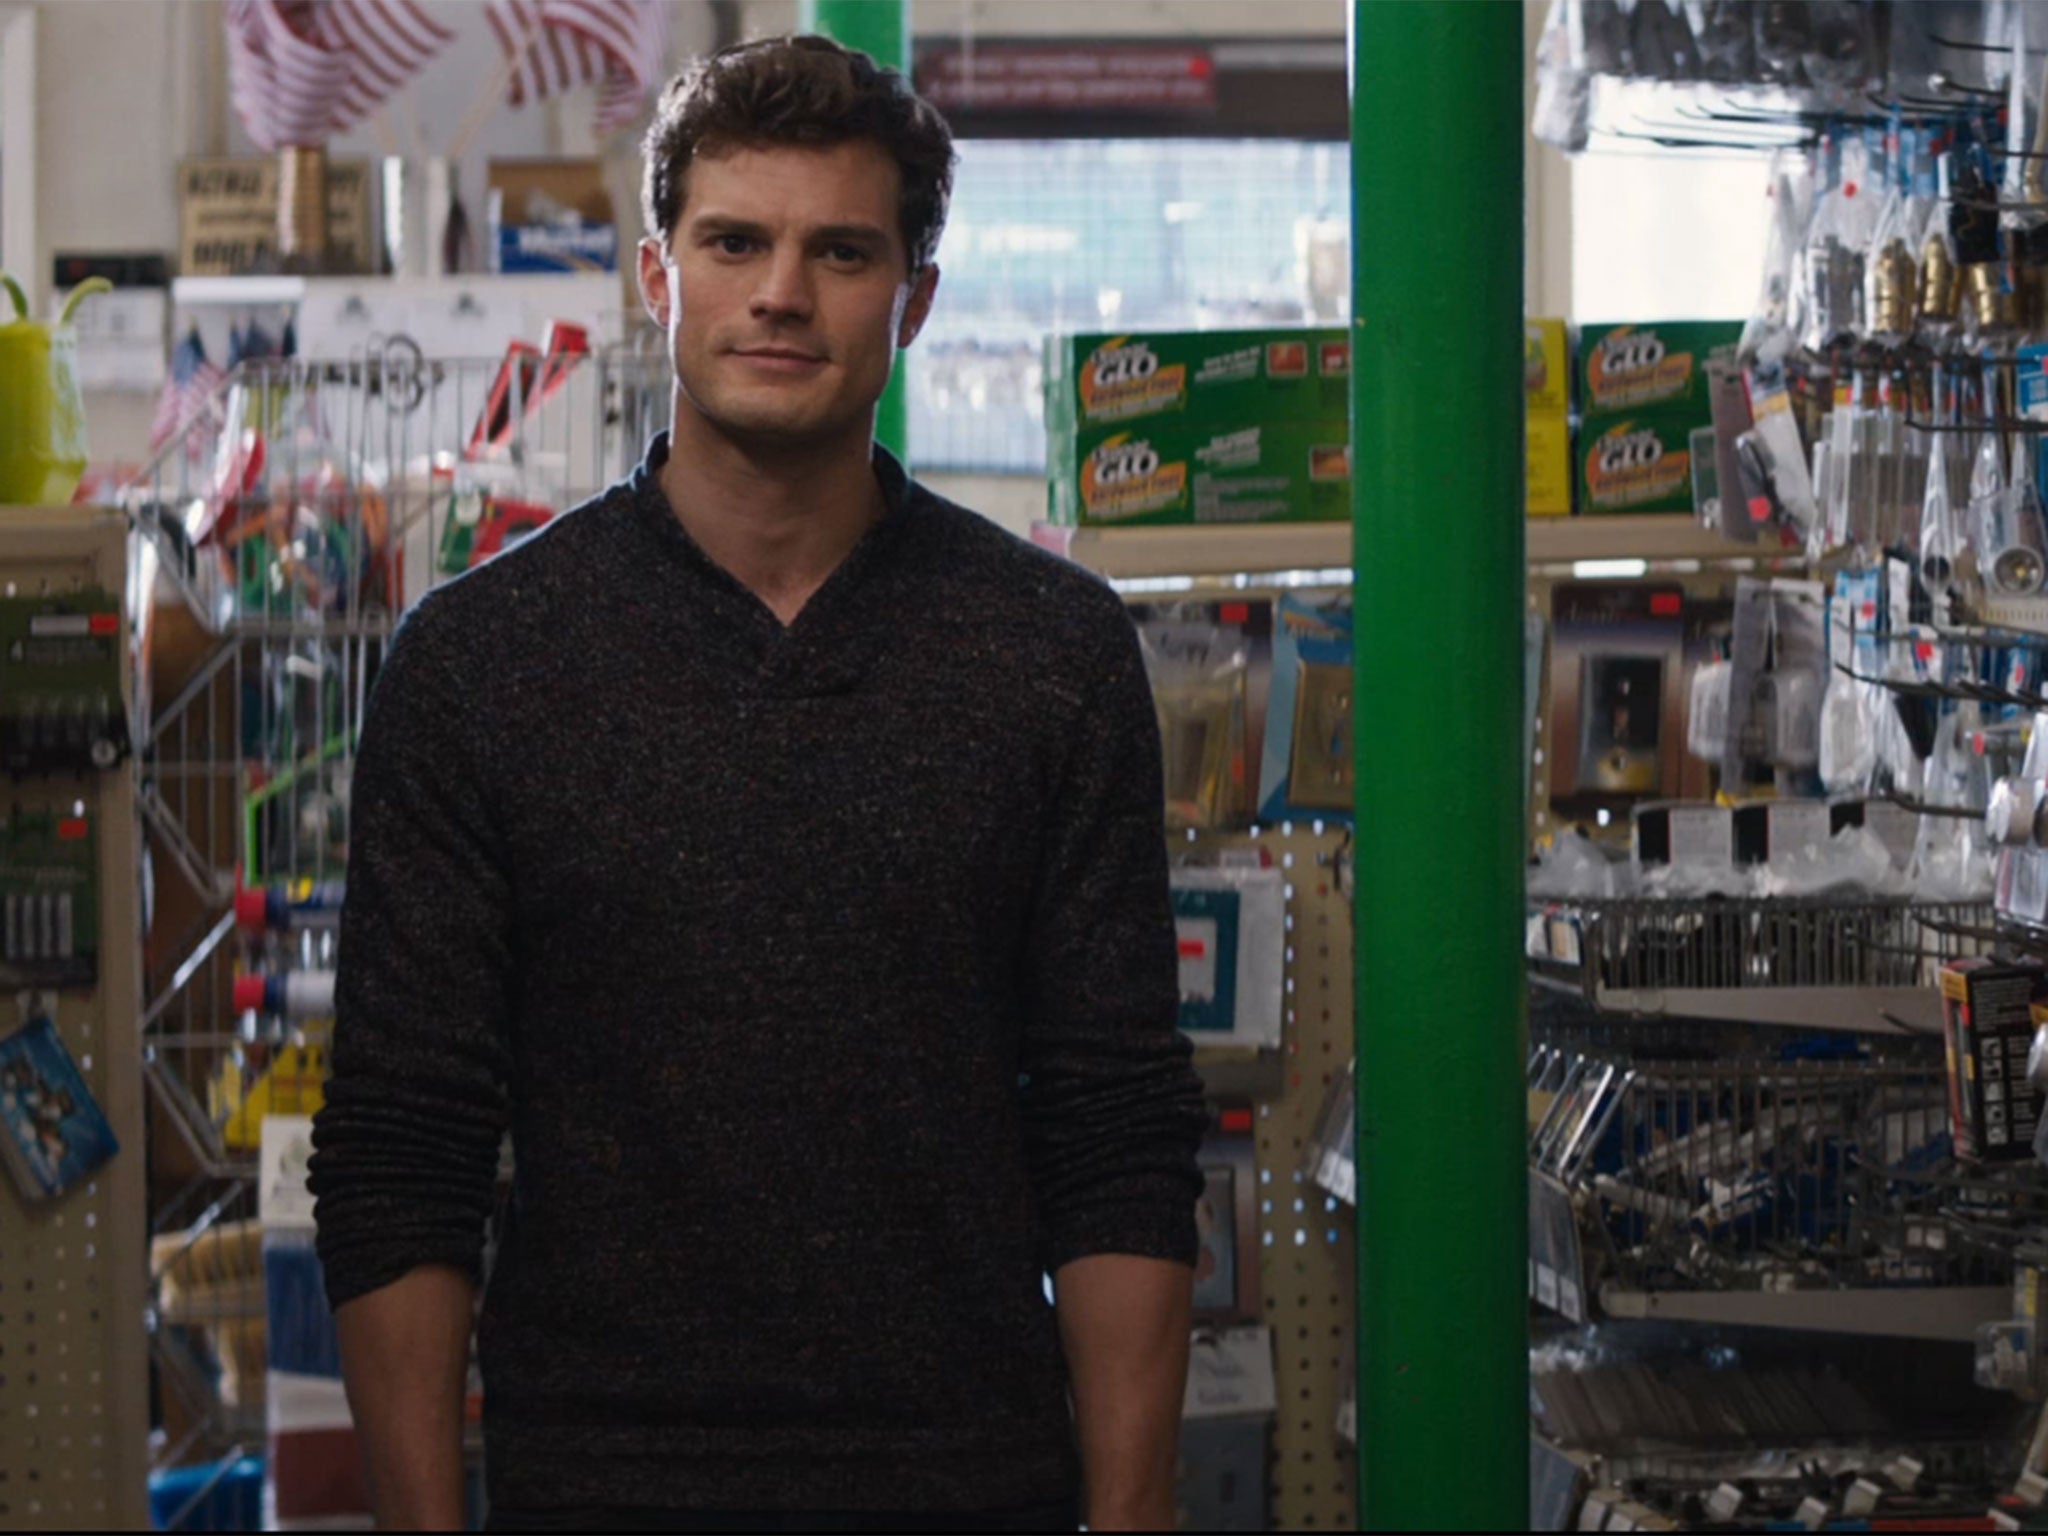 Christian Grey surprises Anastasia Steele in Fifty Shades of Grey